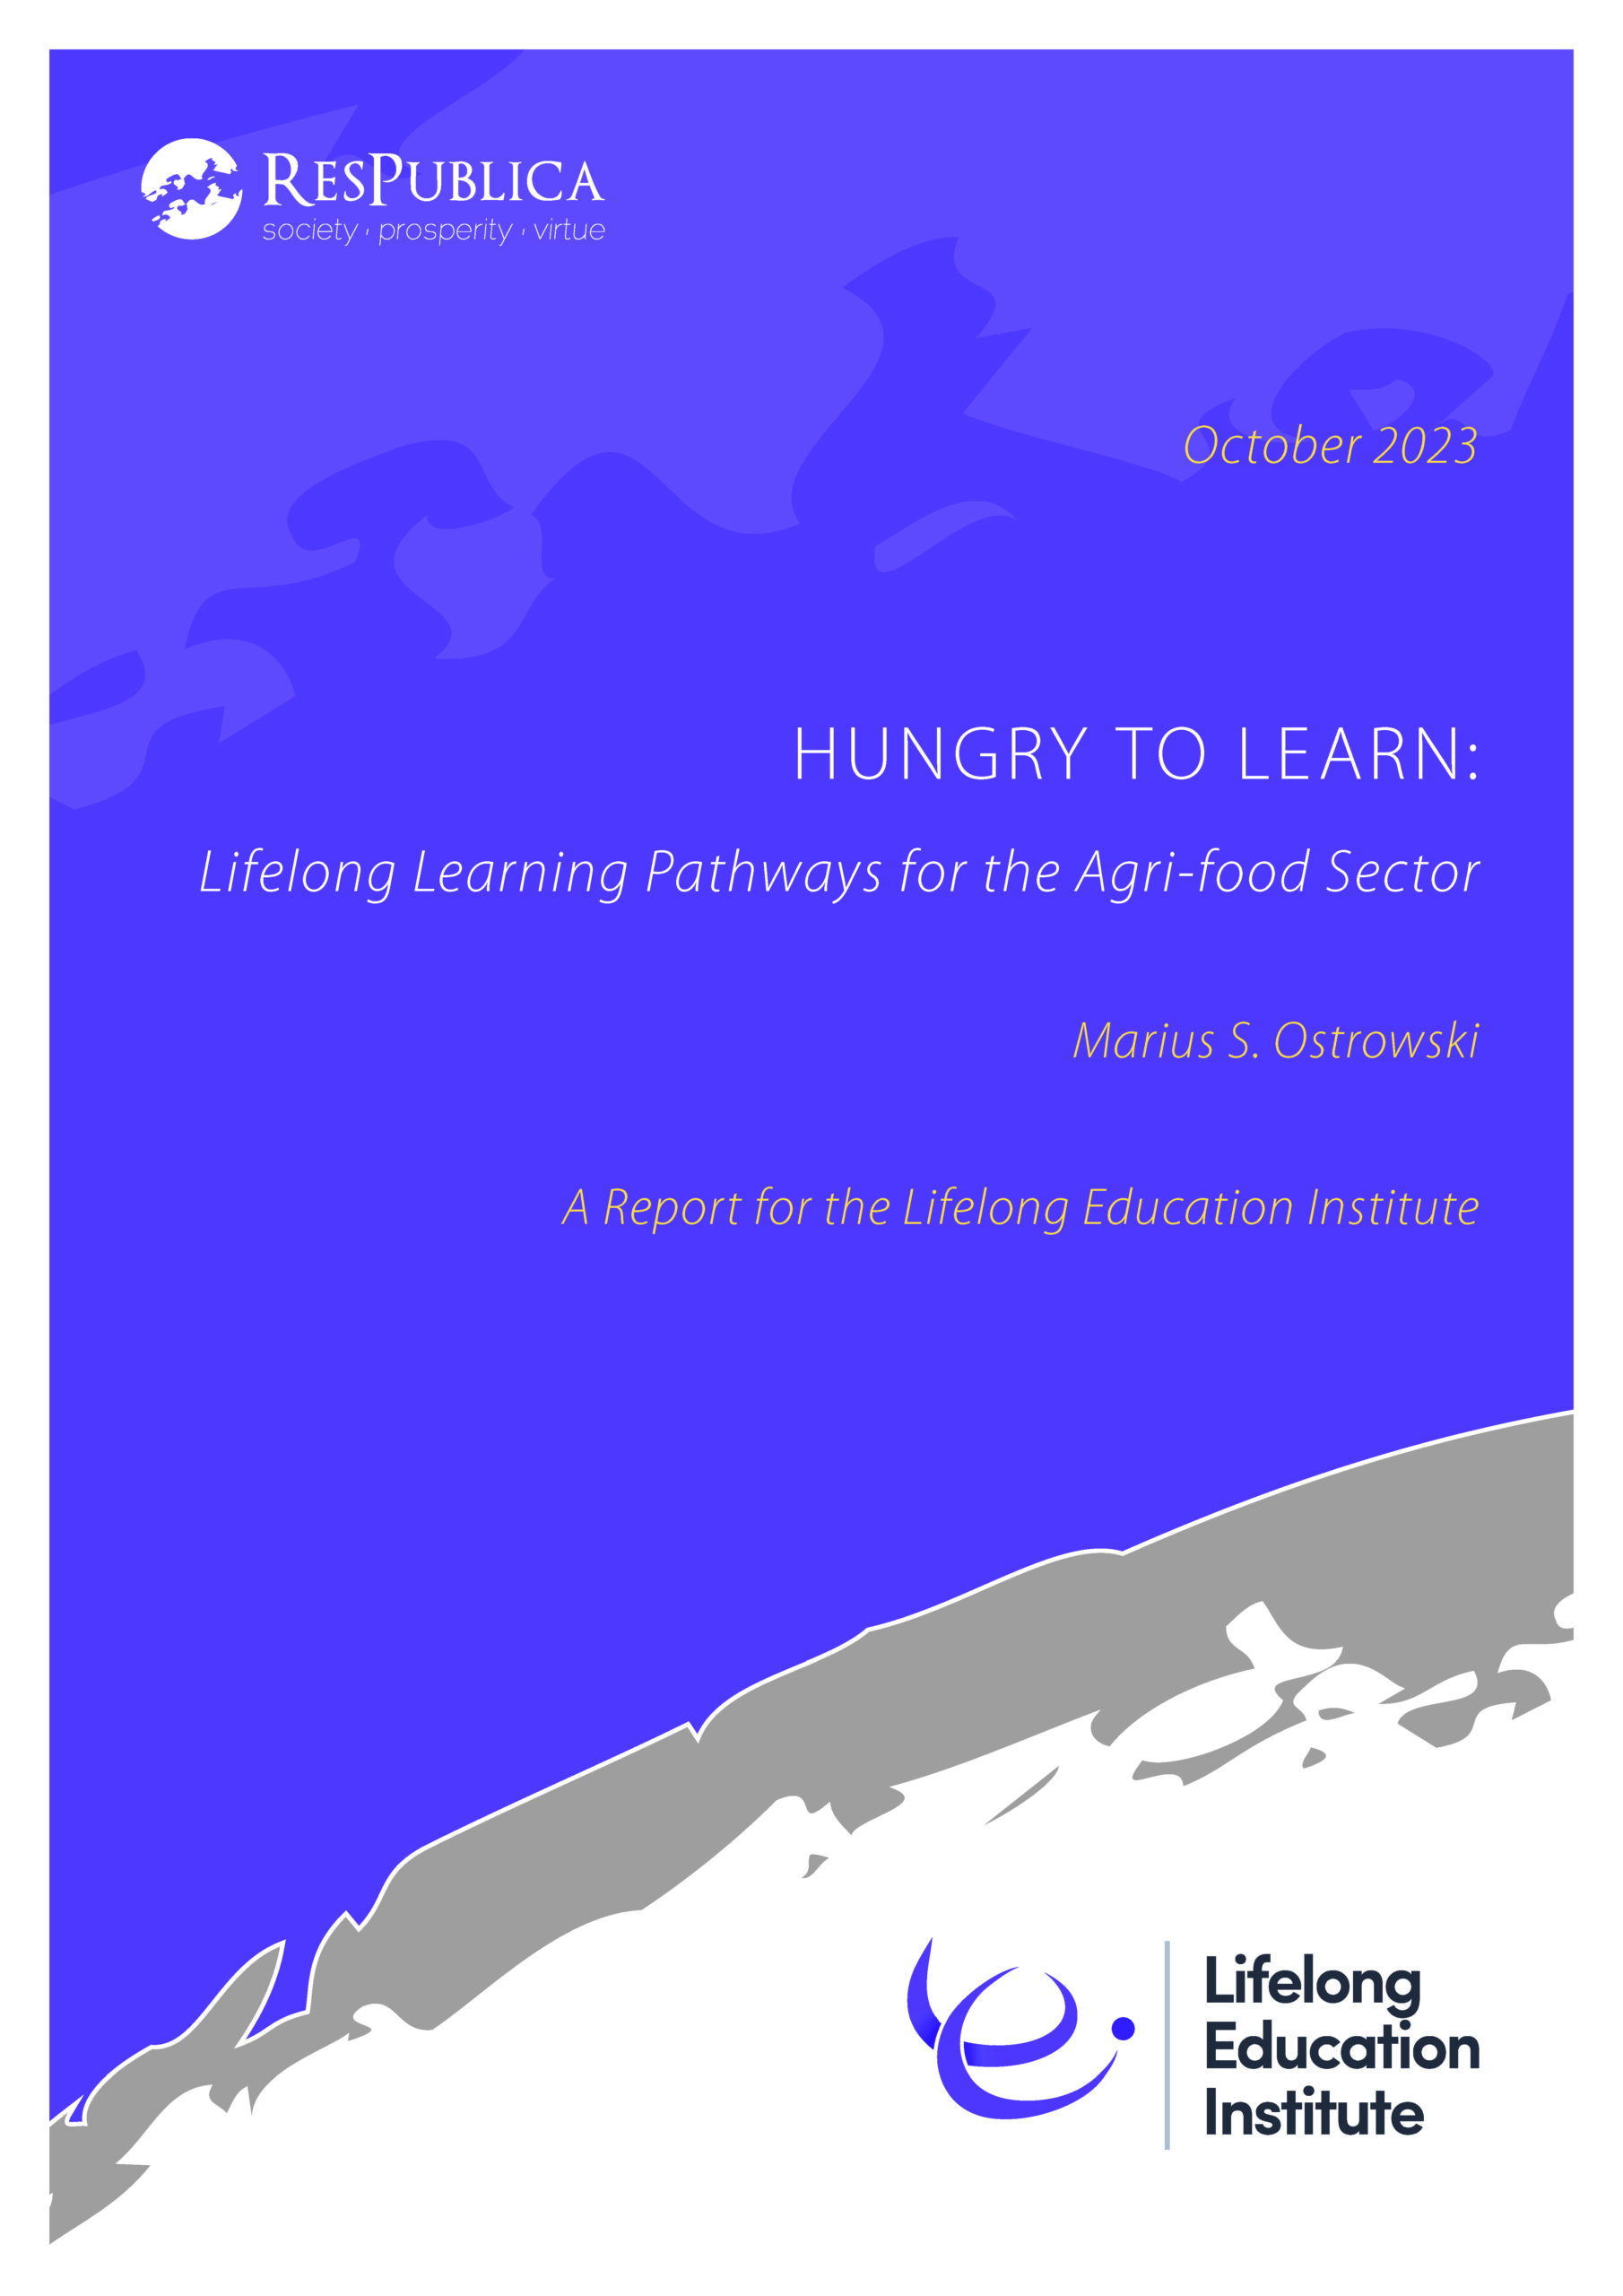 Hungry to Learn: Lifelong Learning Pathways for the Agri-food Sector